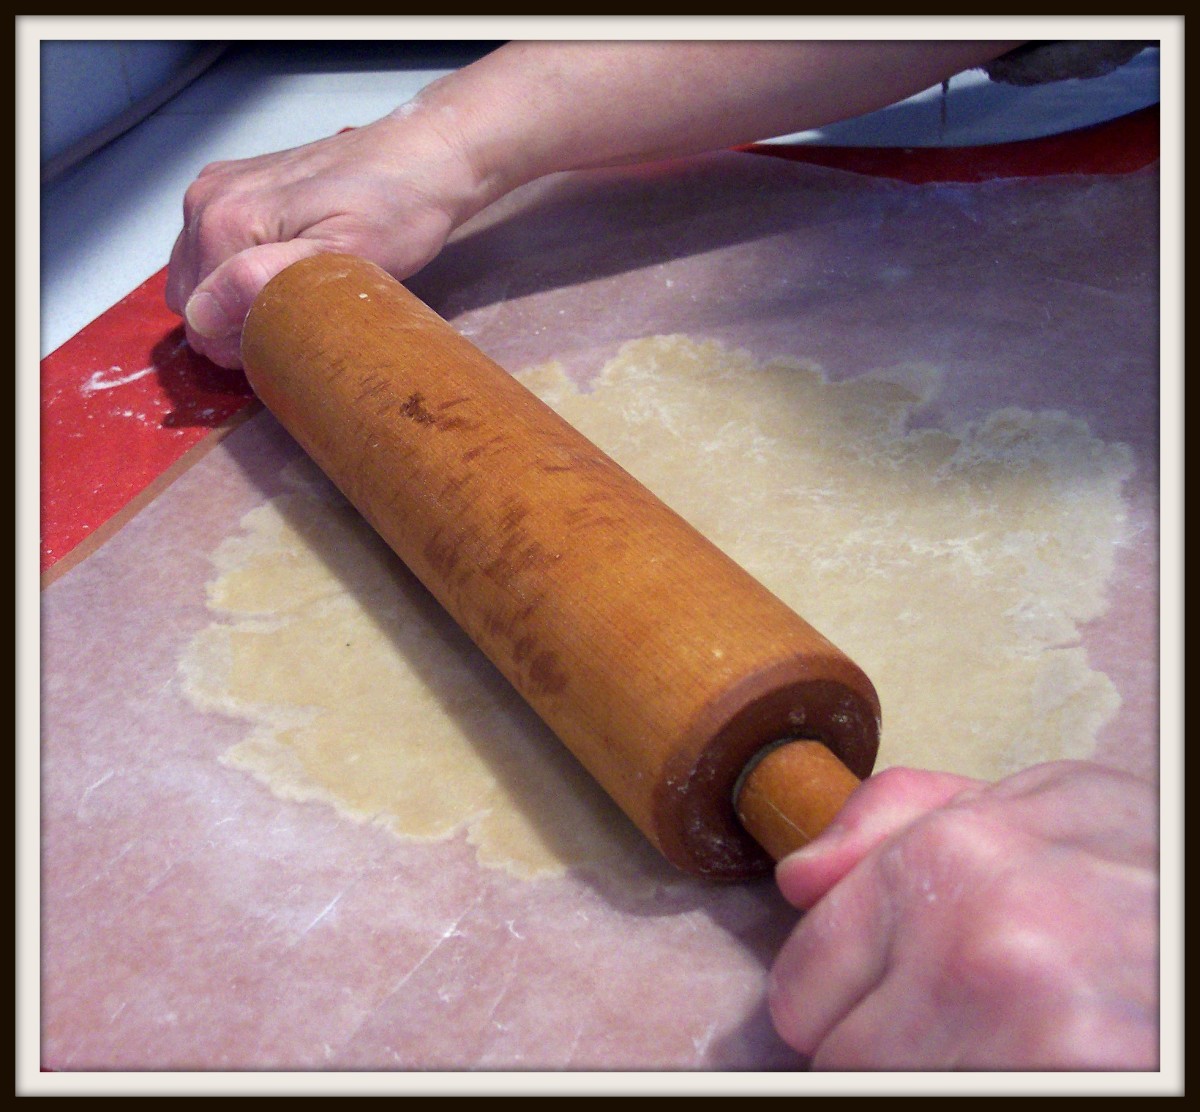 One way to roll out the dough is to roll it between two sheets of floured wax paper.